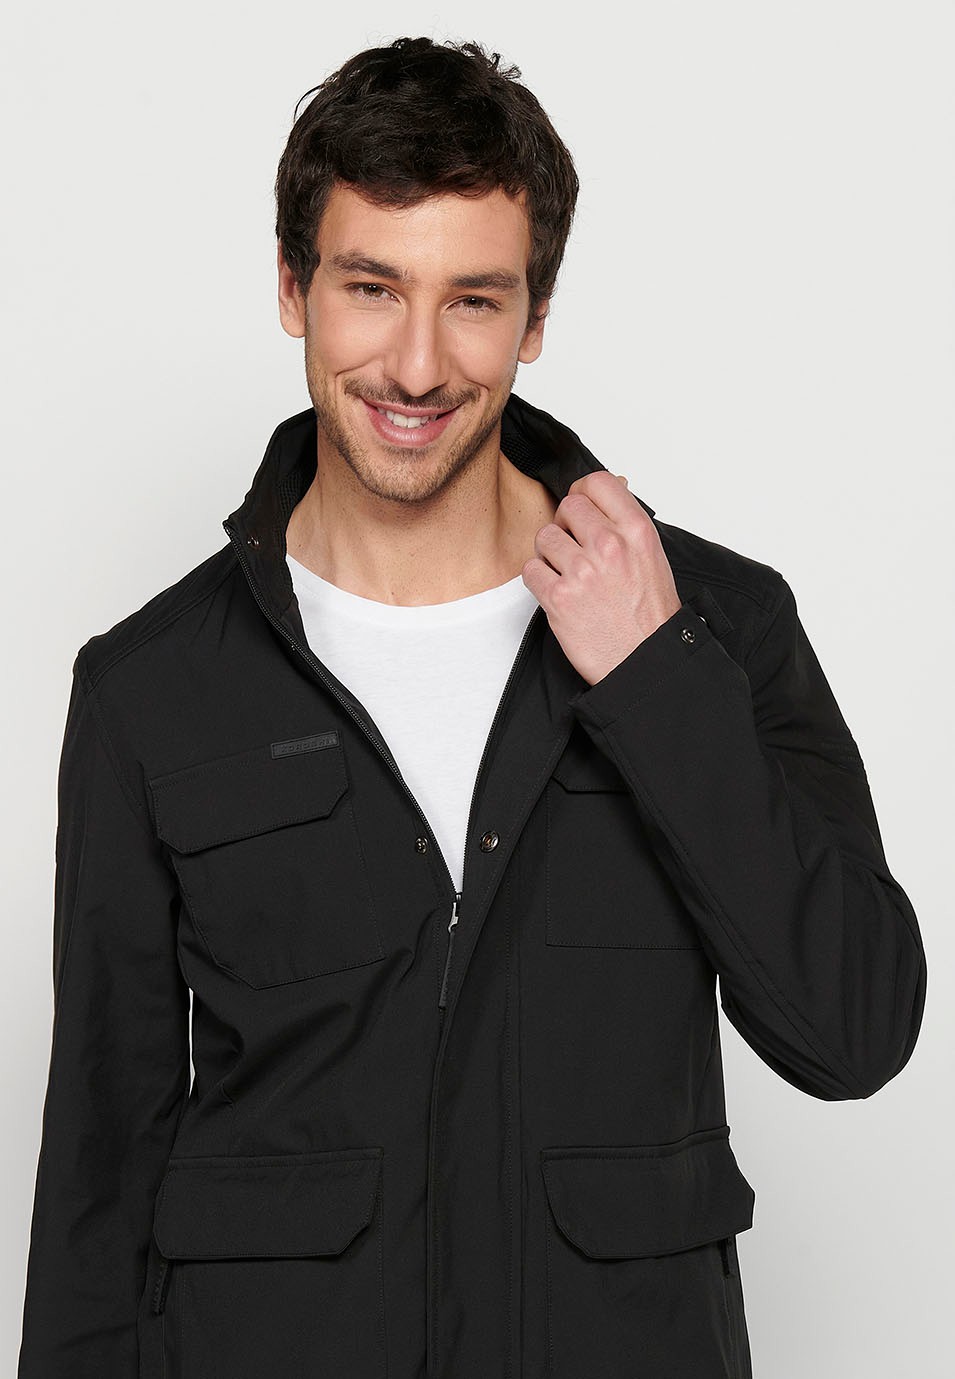 Long Black High Neck Windbreaker Jacket with Front Zipper Closure and Four Flap Pockets for Men 1